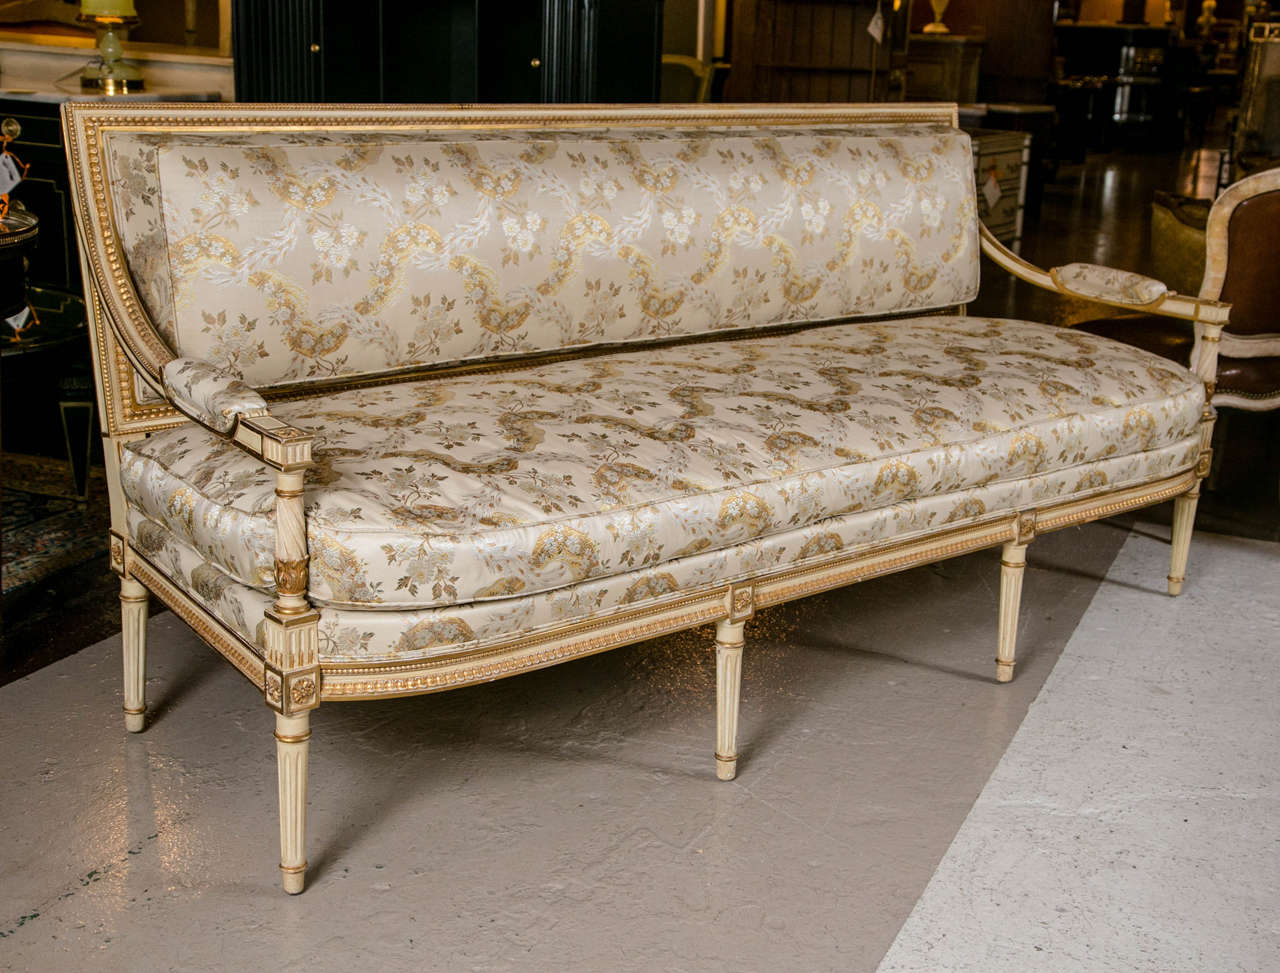 Louis XVI style sofa by Maison Jansen. Wonderfully upholstered in silk and linen. The parcel paint decorated and gilt gold sofa is constructed by hand. The tapering legs support a carved apron leading to a down cushion flanked by wood armrests and a